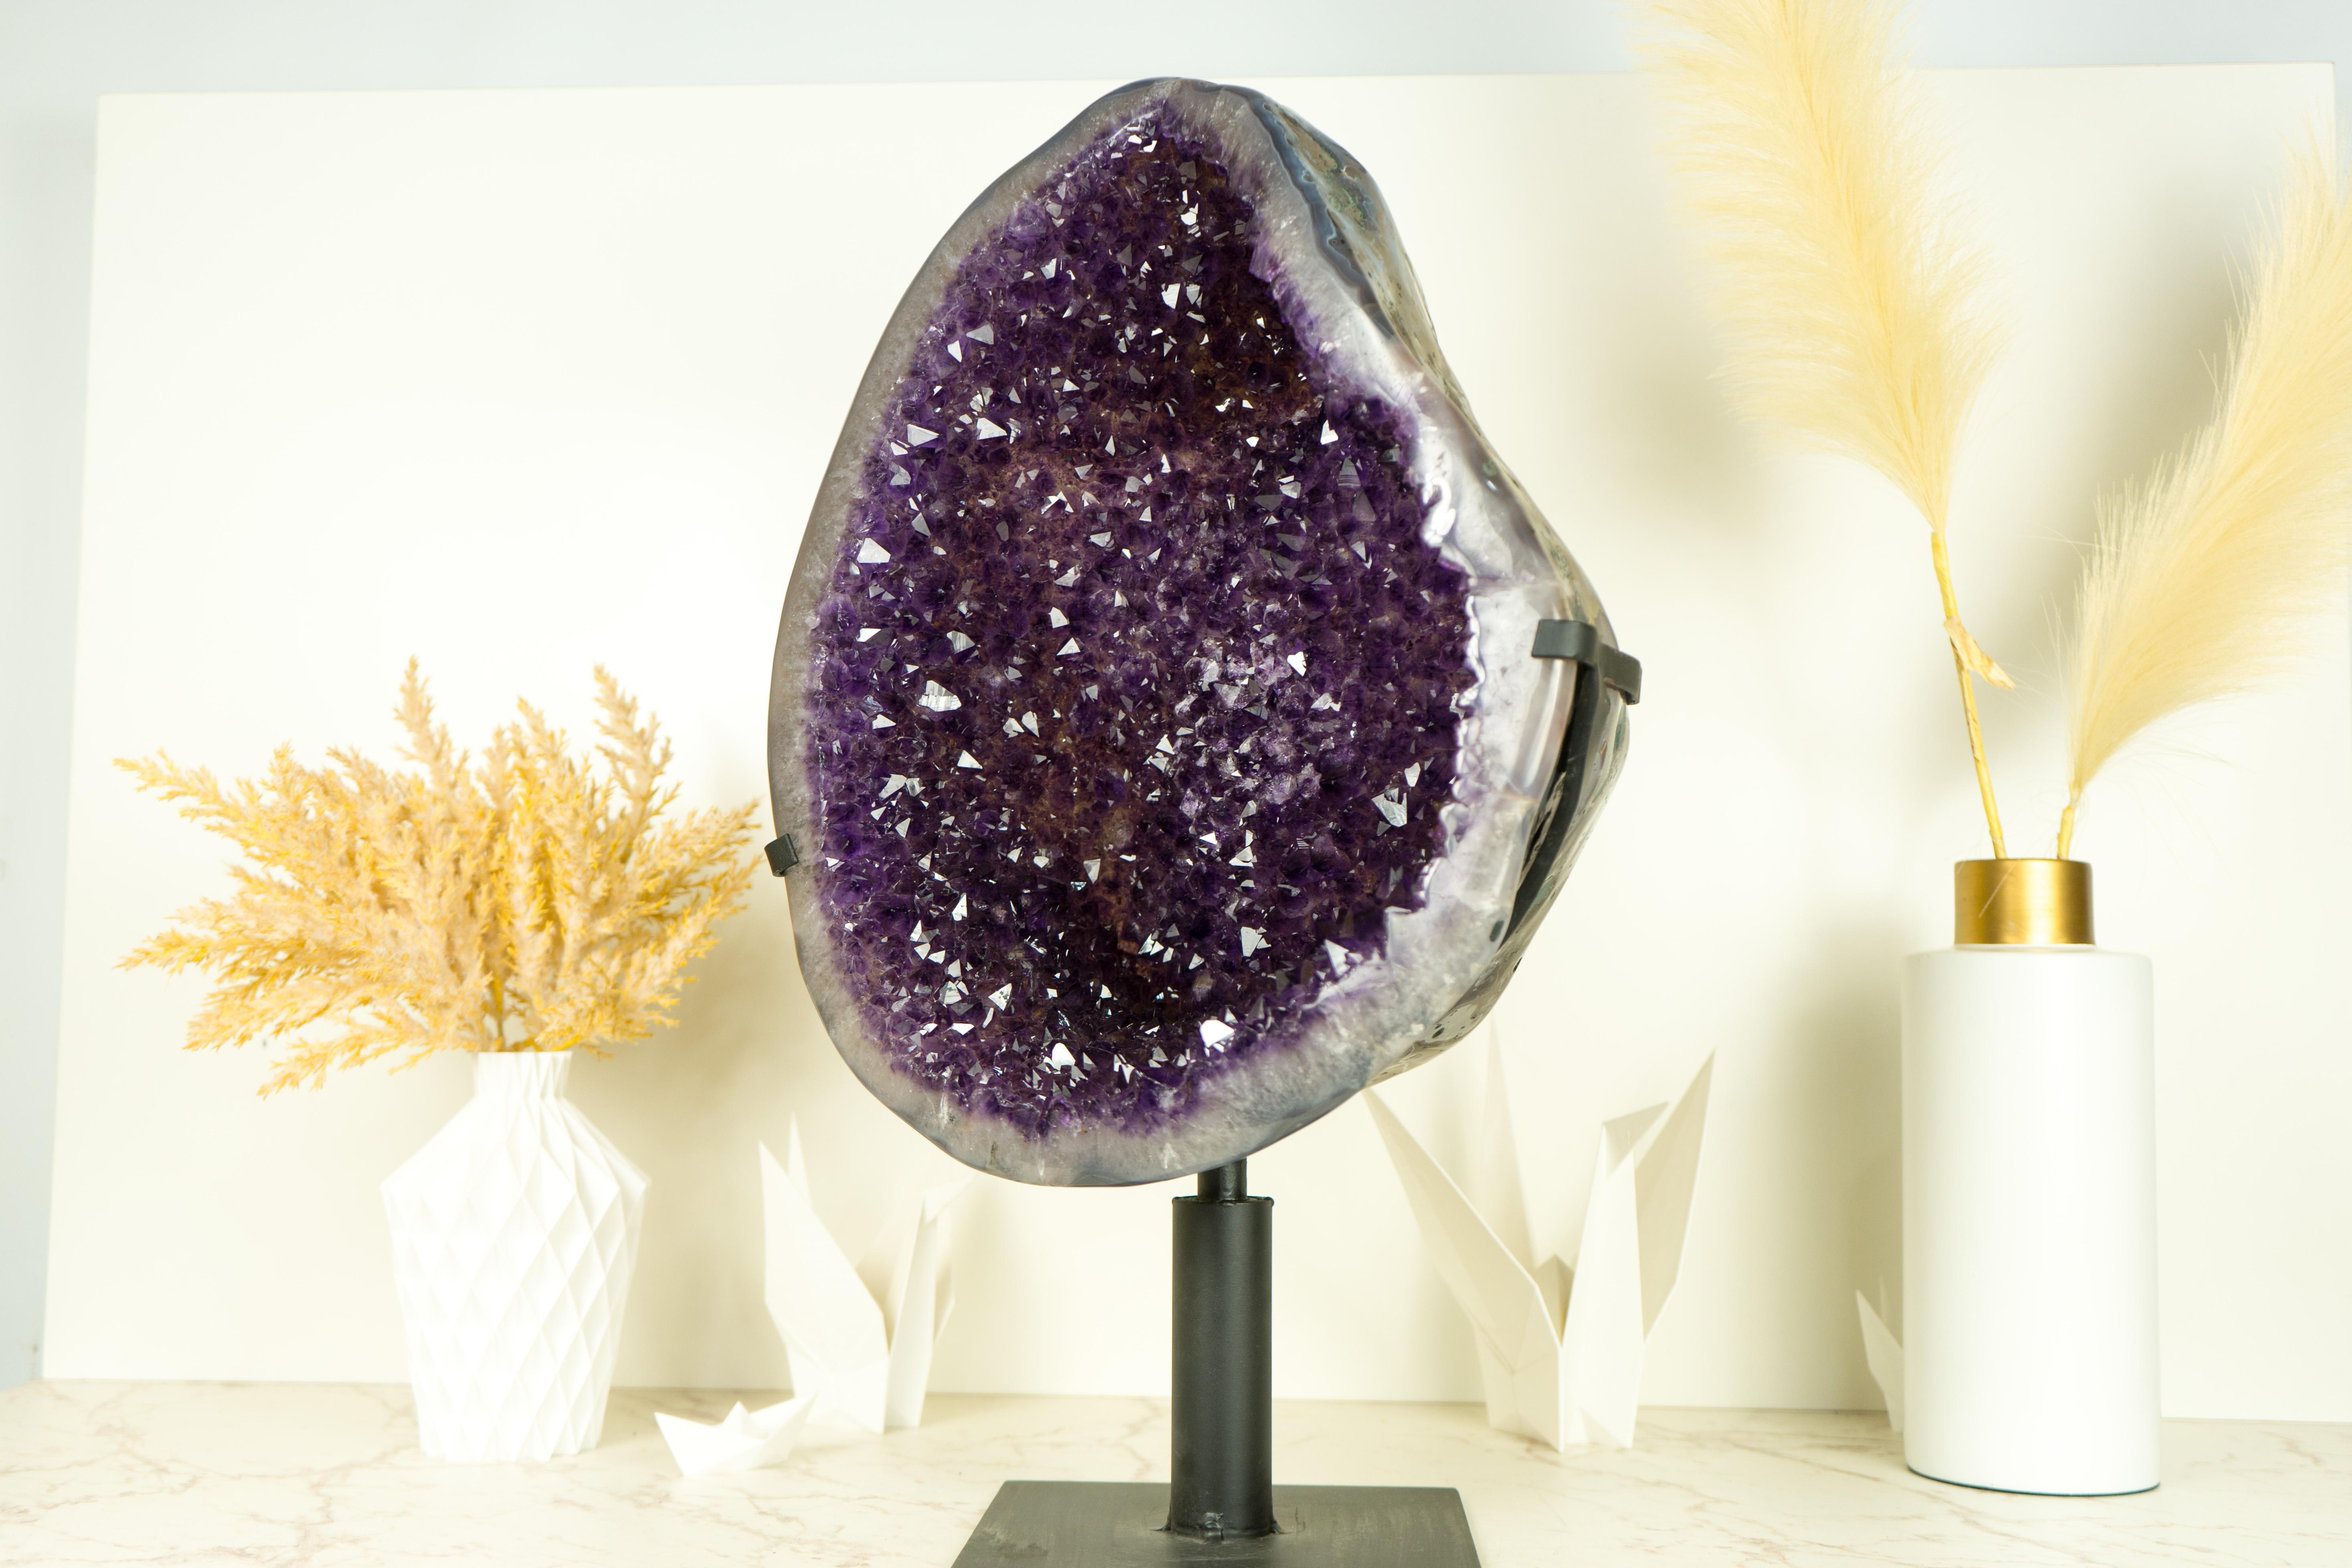 Brazilian Large Amethyst Geode Cluster with Purple Galaxy Druzy and Polished Agate Border